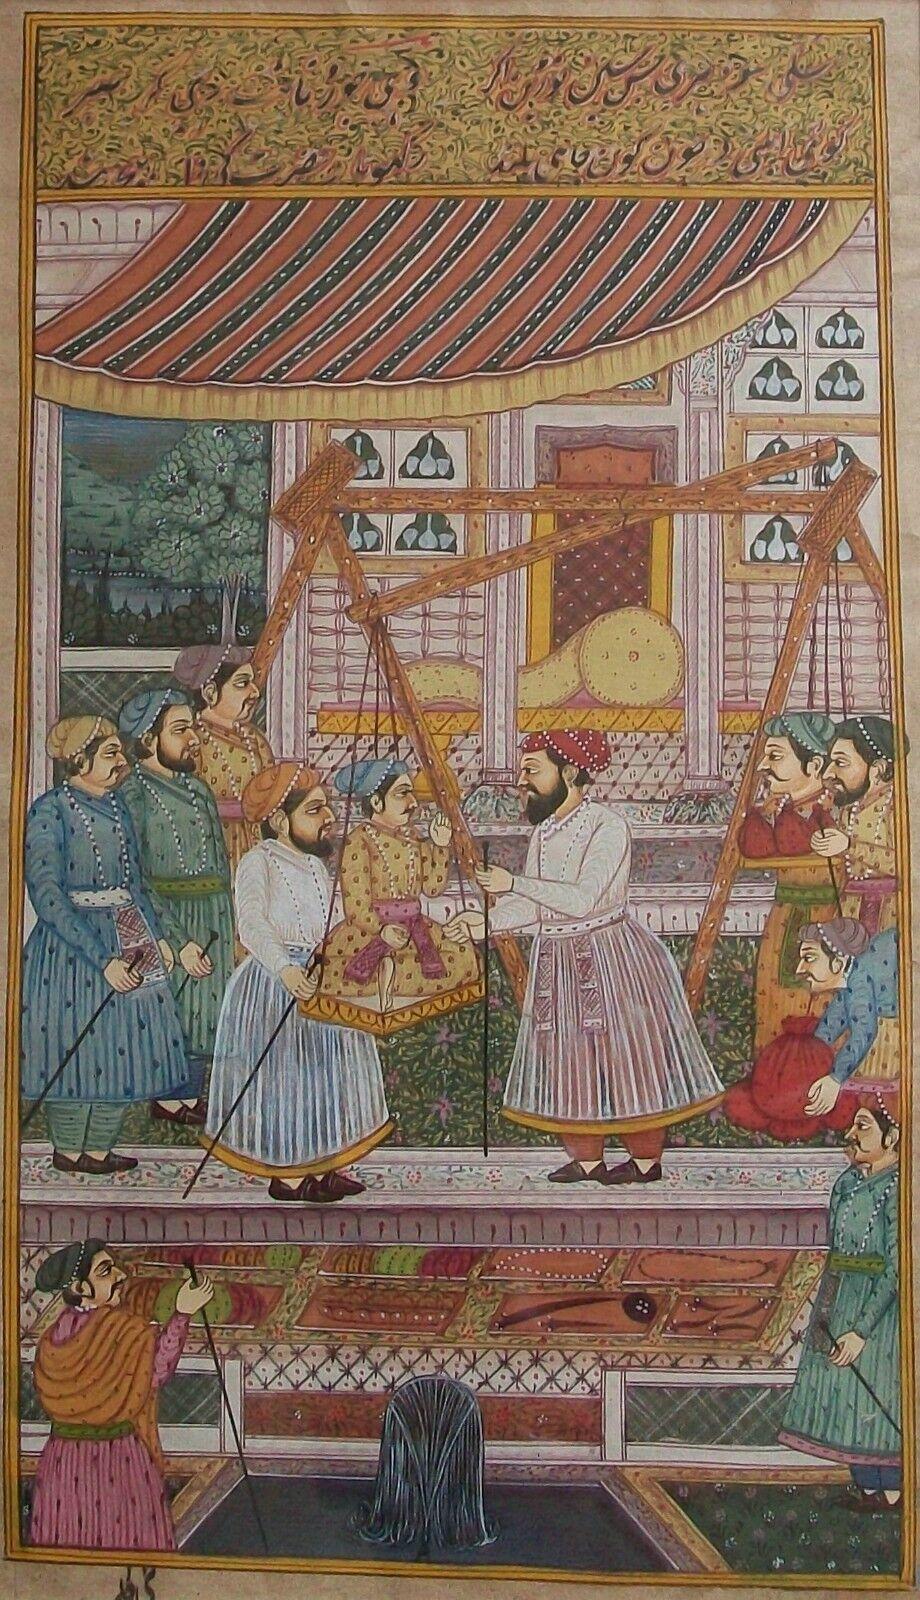 Mughal style miniature painting - gouache on paper with silver highlights - hand painted - depicting a court scene with the Mughal Emperor Jahangir weighing his son, Prince Khurram, as part of his 15th birthday celebration, his weight measured in